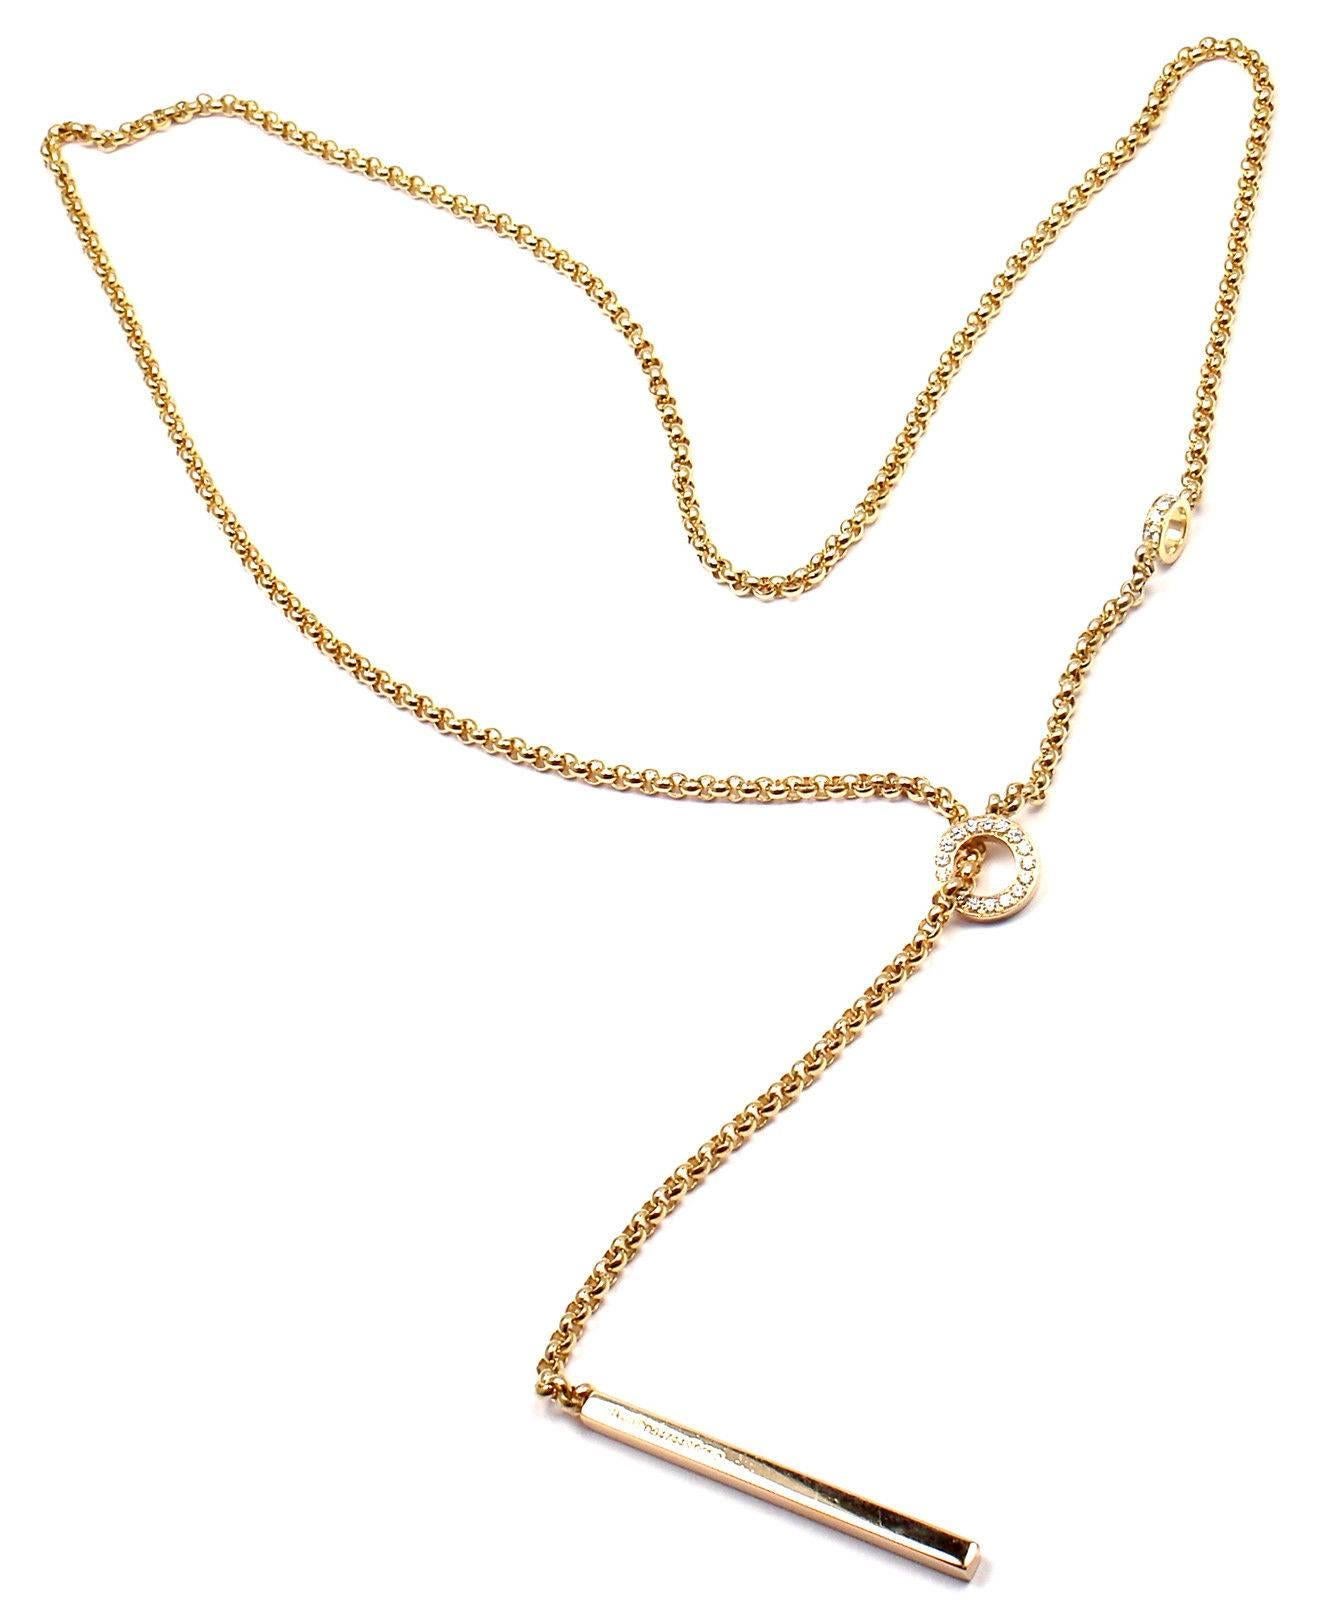 Women's or Men's Piaget Possession Diamond Lariat Long Yellow Gold Necklace